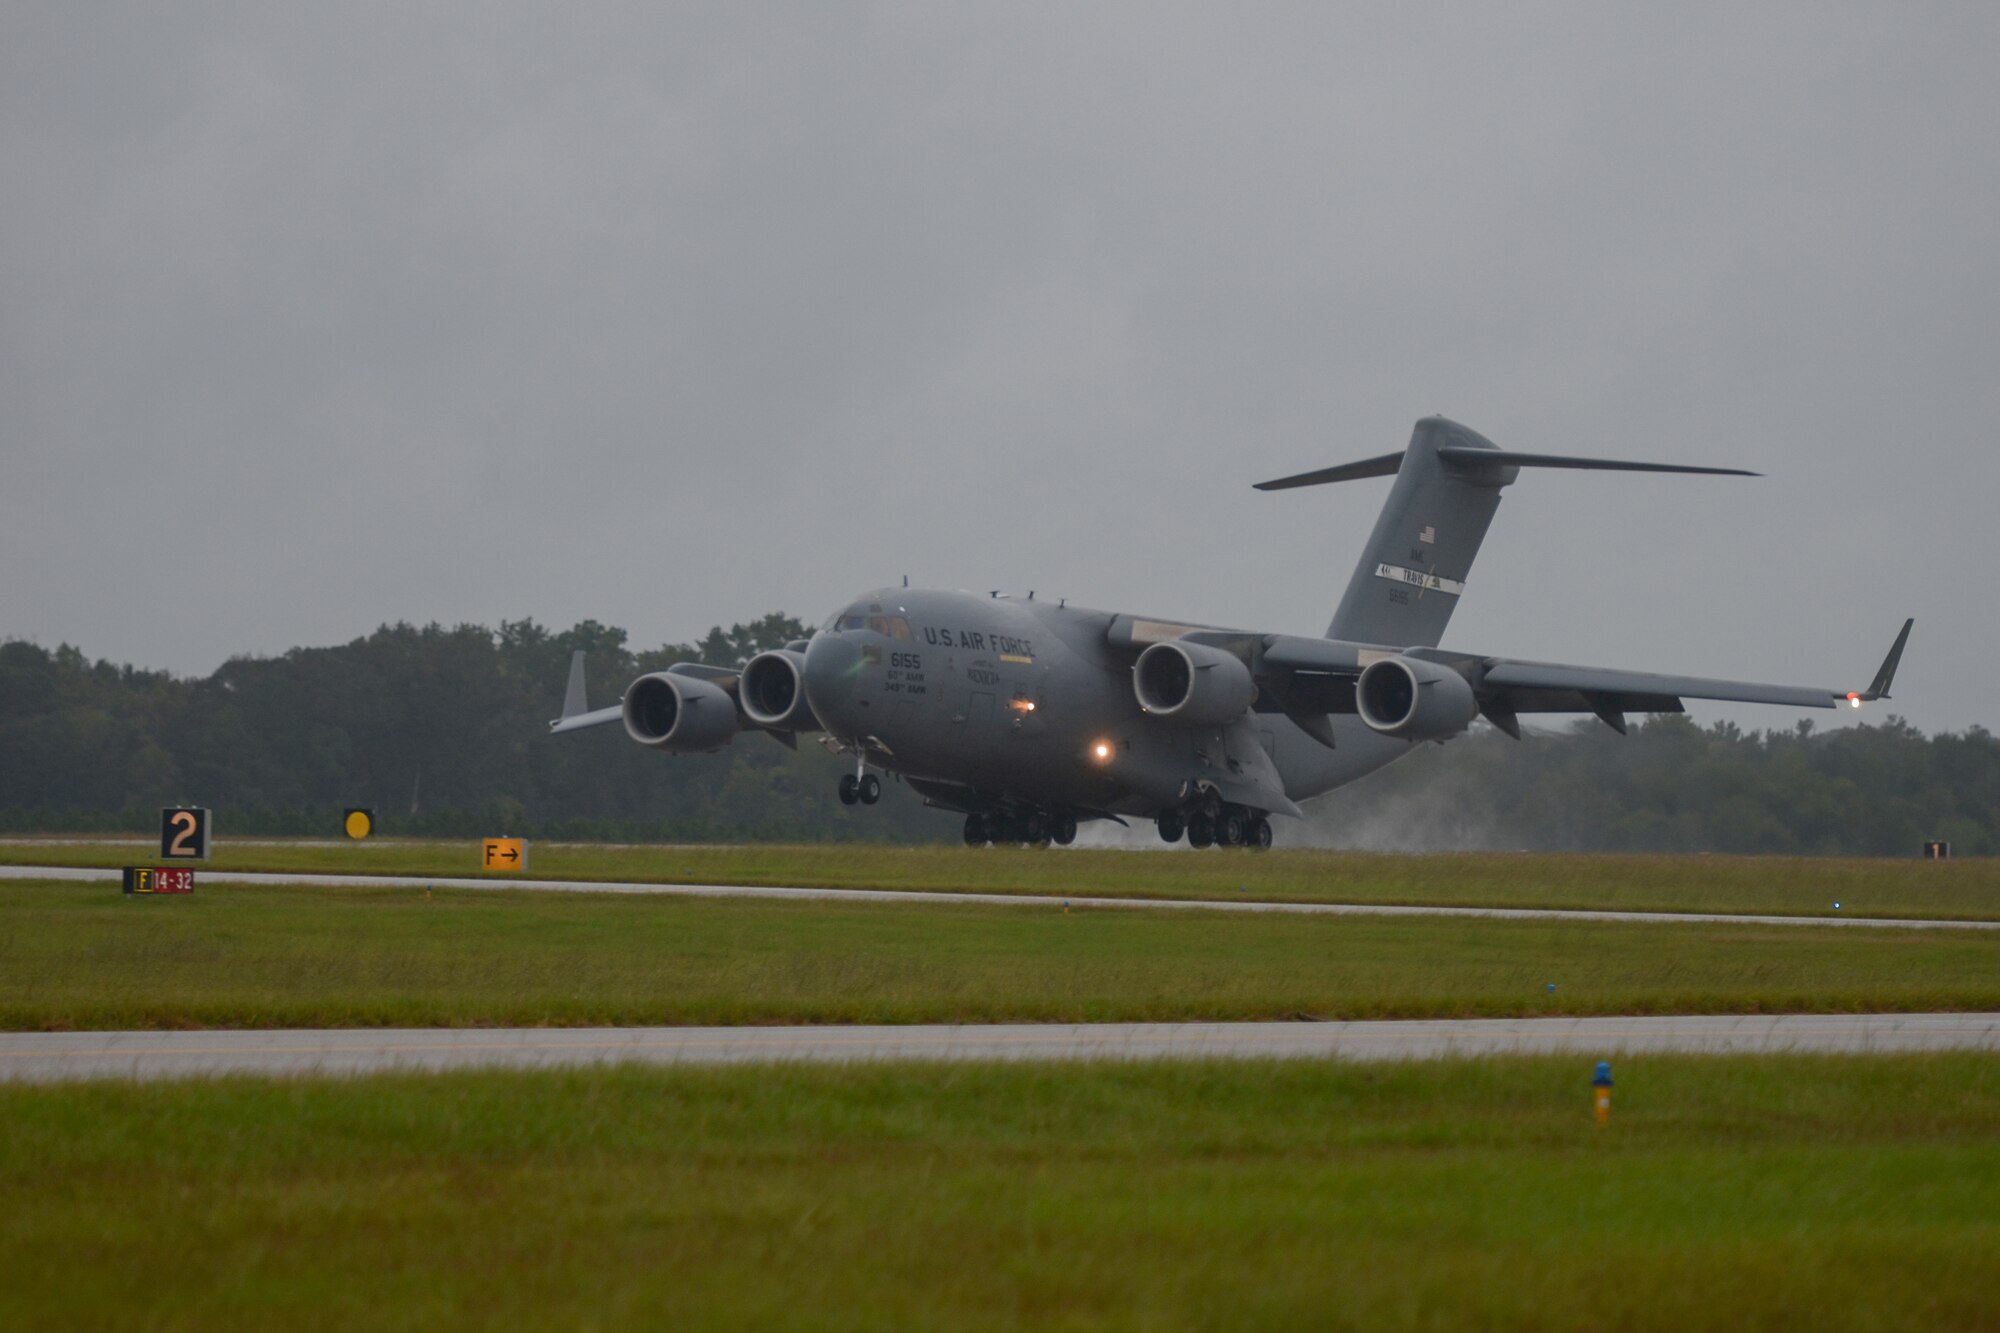 A U.S. C-17 Globemaster III, a large military transport aircraft, belonging to the 21st Airlift Squadron from Travis AFB, Calif., lands at McEntire Joint National Guard Base, S.C., Oct. 7, 2016. Equipment from the South Carolina Air National Guard's 245th Air Traffic Control Squadron was loaded onto the aircraft in preparation for a deployment in support of Operation INHERENT RESOLVE. (U.S. Air National Guard photo by Airman 1st Class Megan Floyd)
